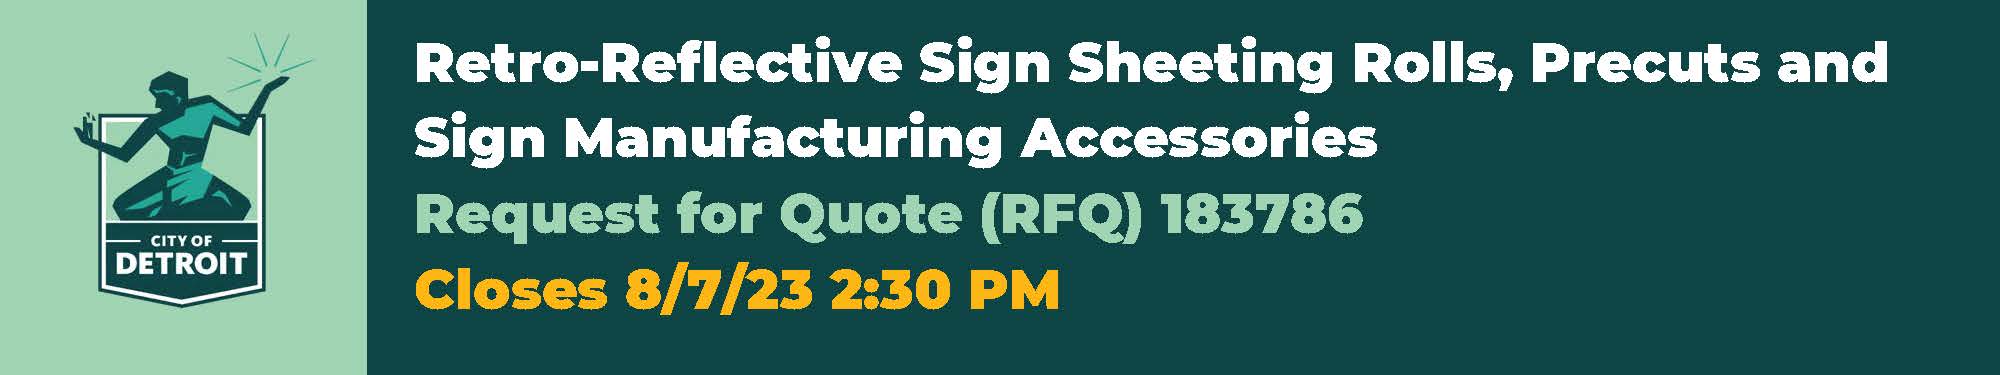 Take Part: Retro-Reflective Sign Sheeting Rolls, Precuts and Sign Manufacturing Accessories